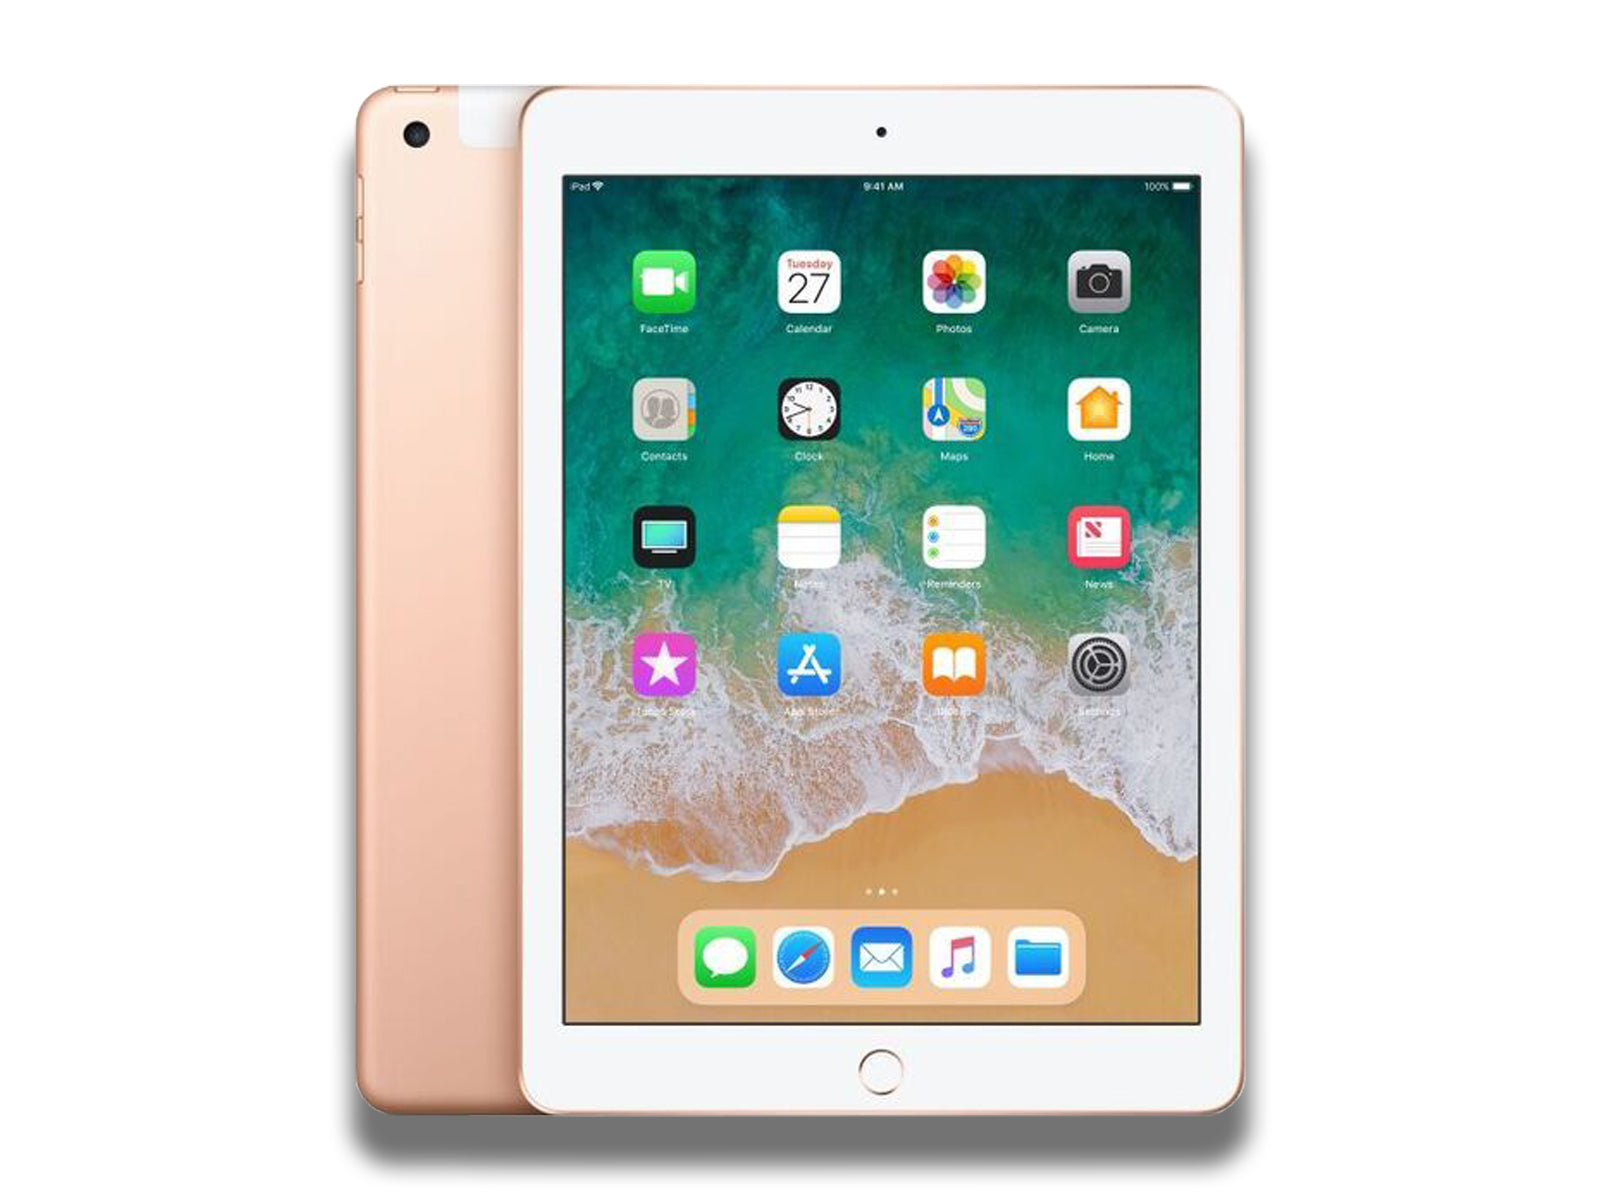 Image shows a front and back view of the gold Apple iPad 6th Generation